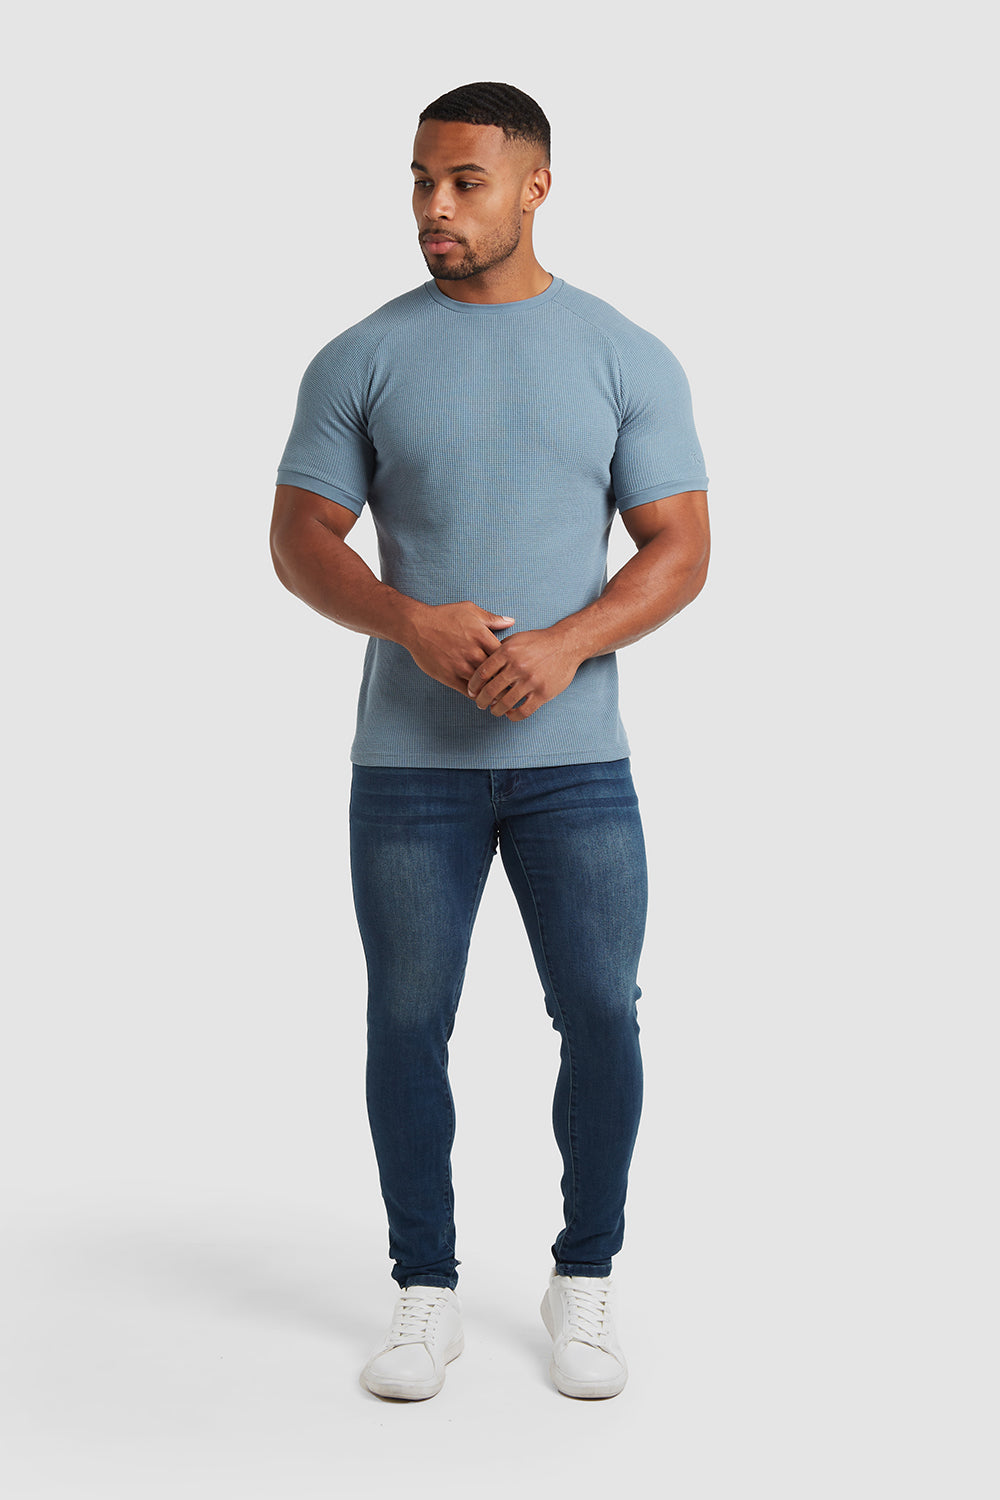 Waffle T-Shirt in Slate Blue - TAILORED ATHLETE - ROW